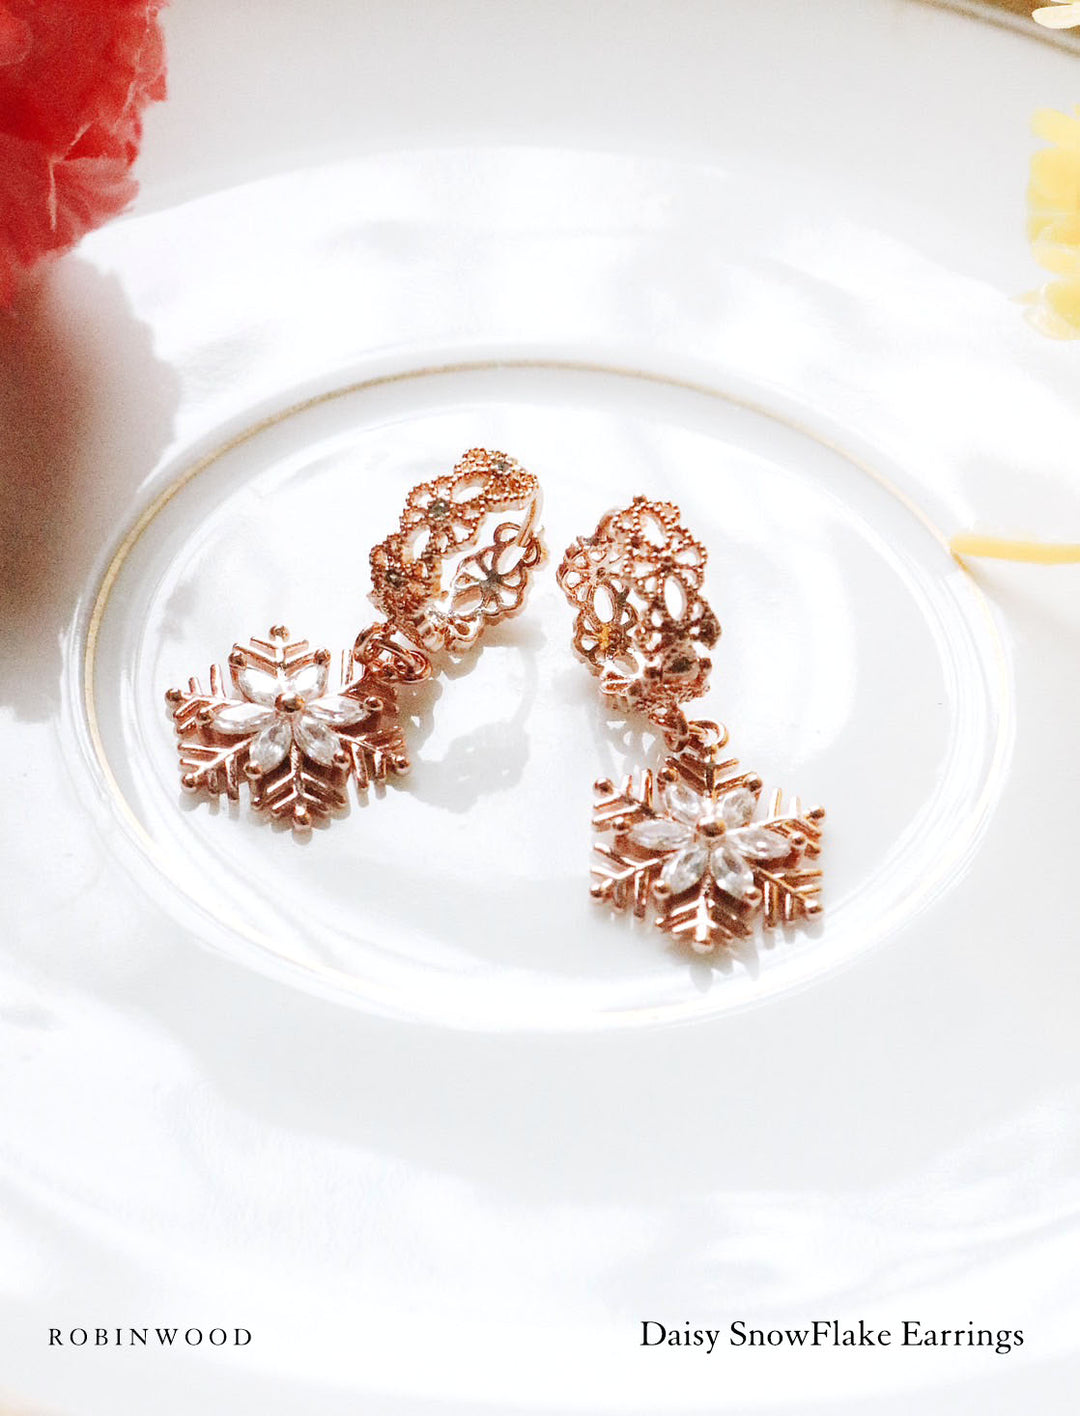 LIMITED COLLECTION'S " DAISY SNOWFLAKE ROSE GOLD EARRINGS , MASTERPIECES, ROBINWOOD